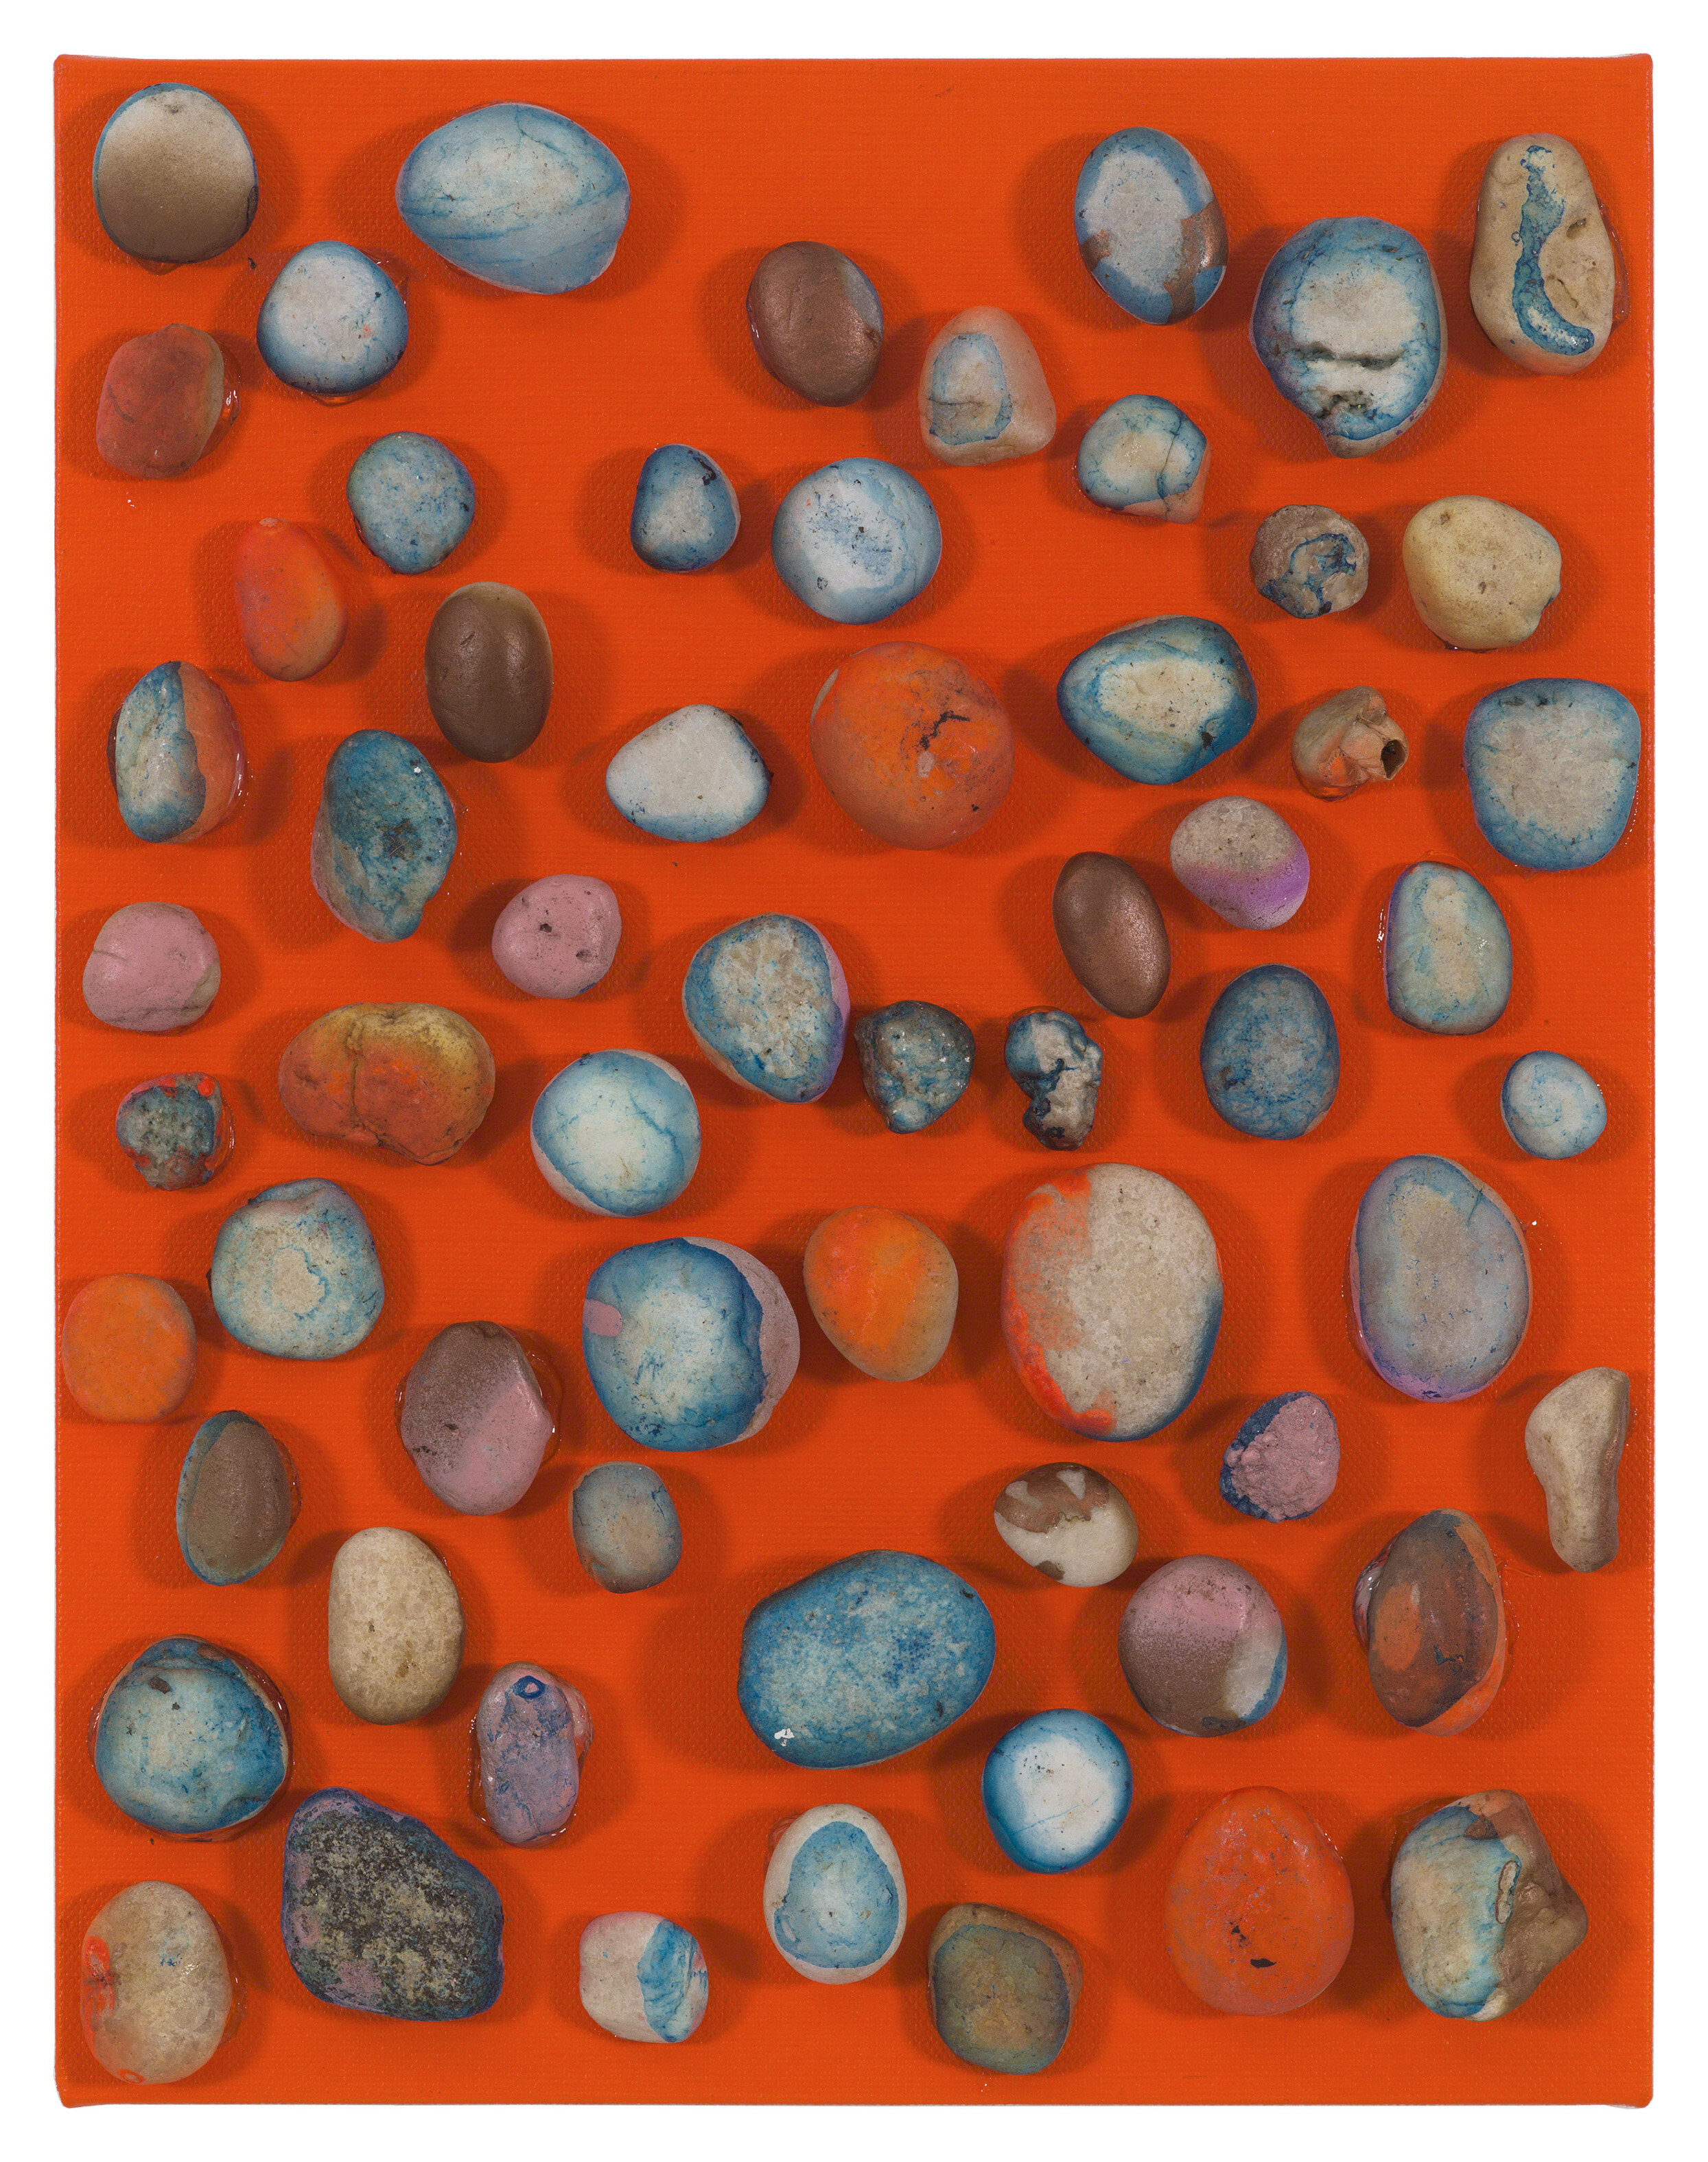  Drew Beattie  People   2019 acrylic and rocks on canvas 14 x 11 inches 